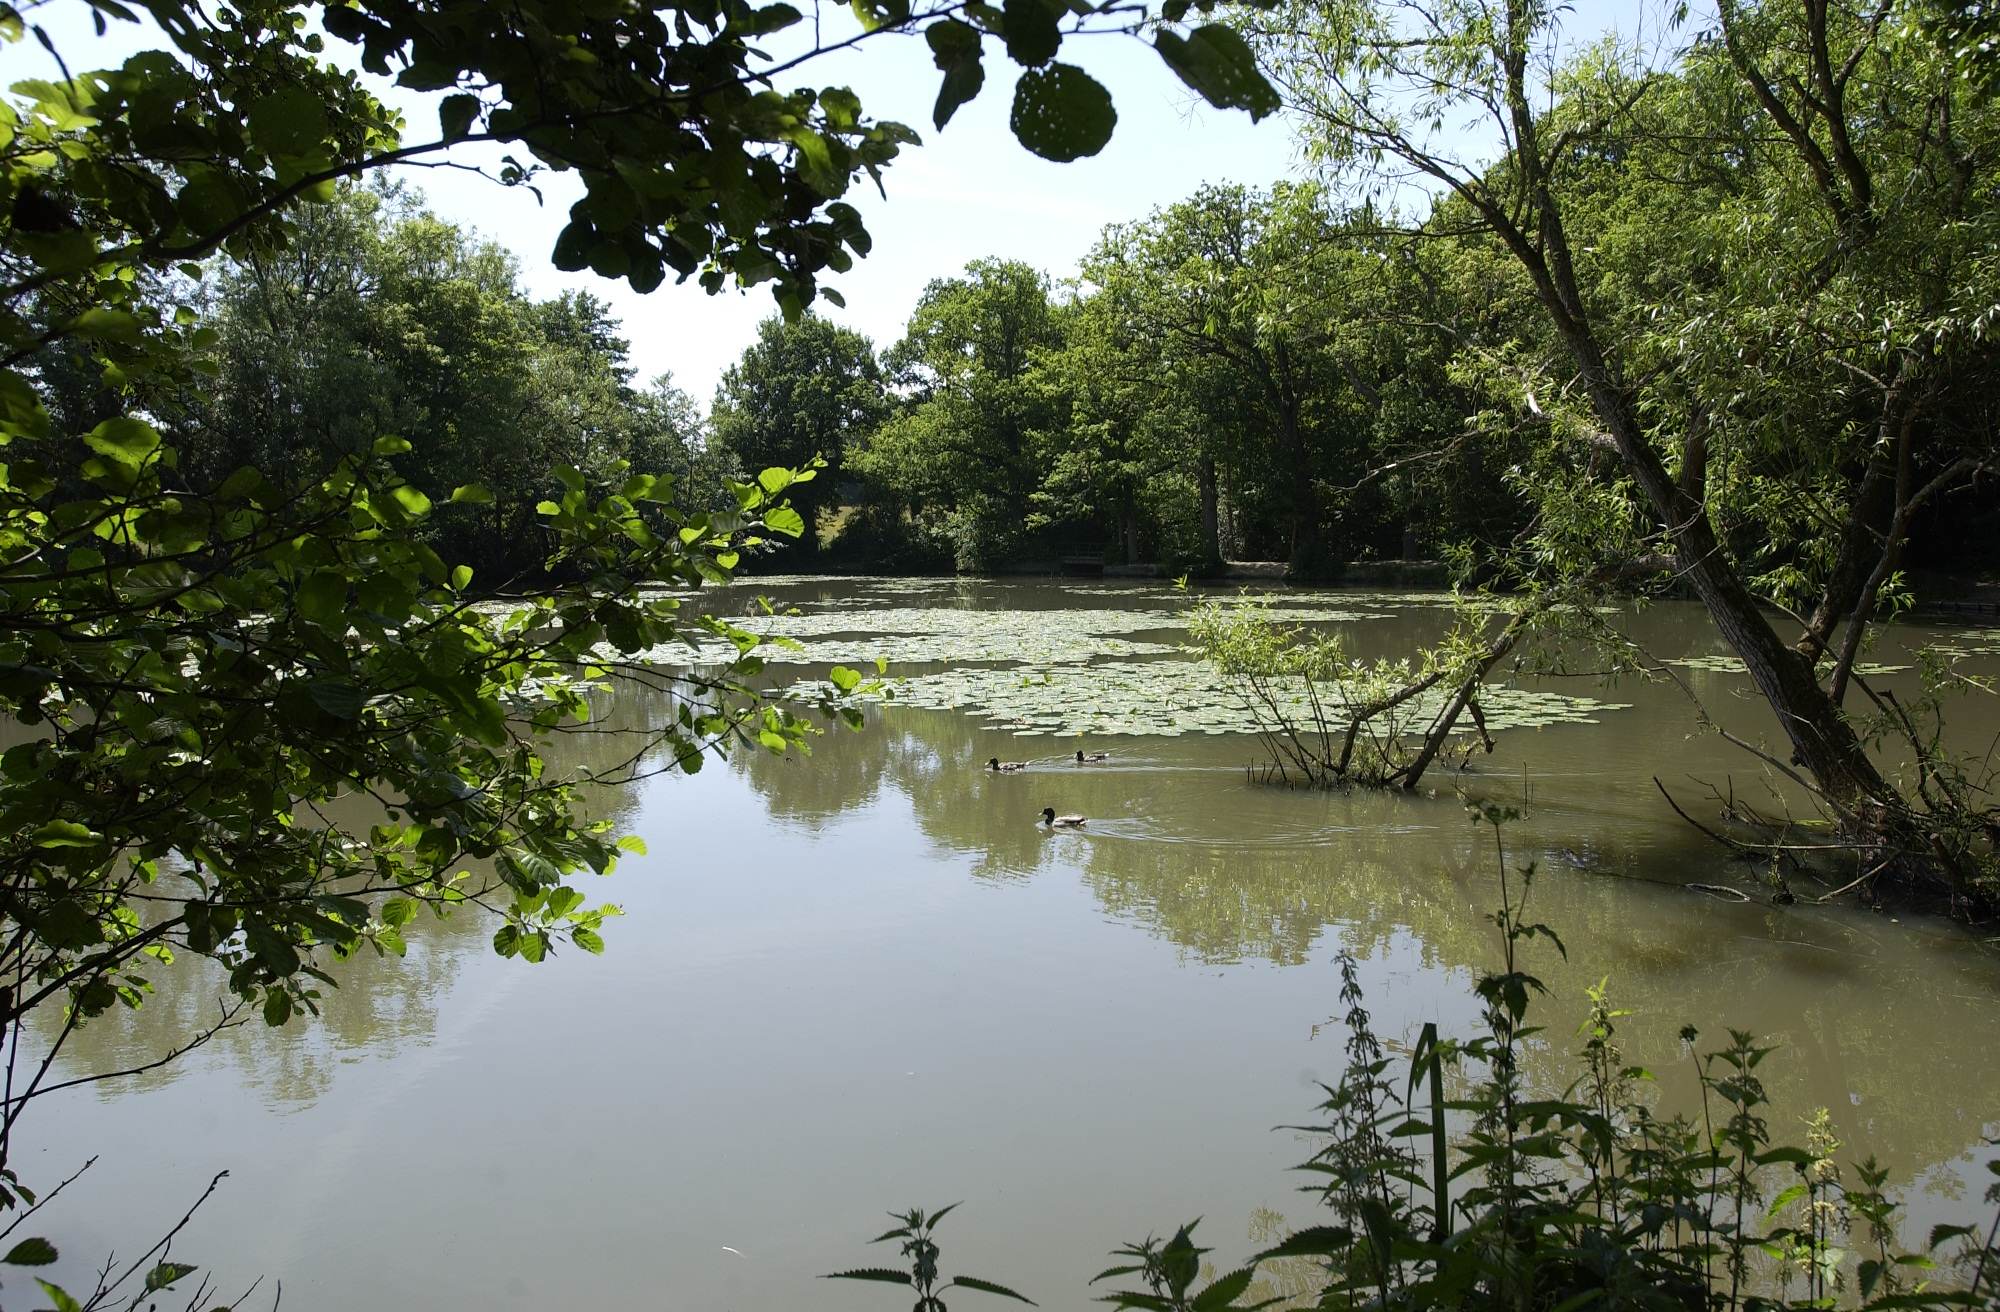 Photograph of a pond in Bedelands Farm